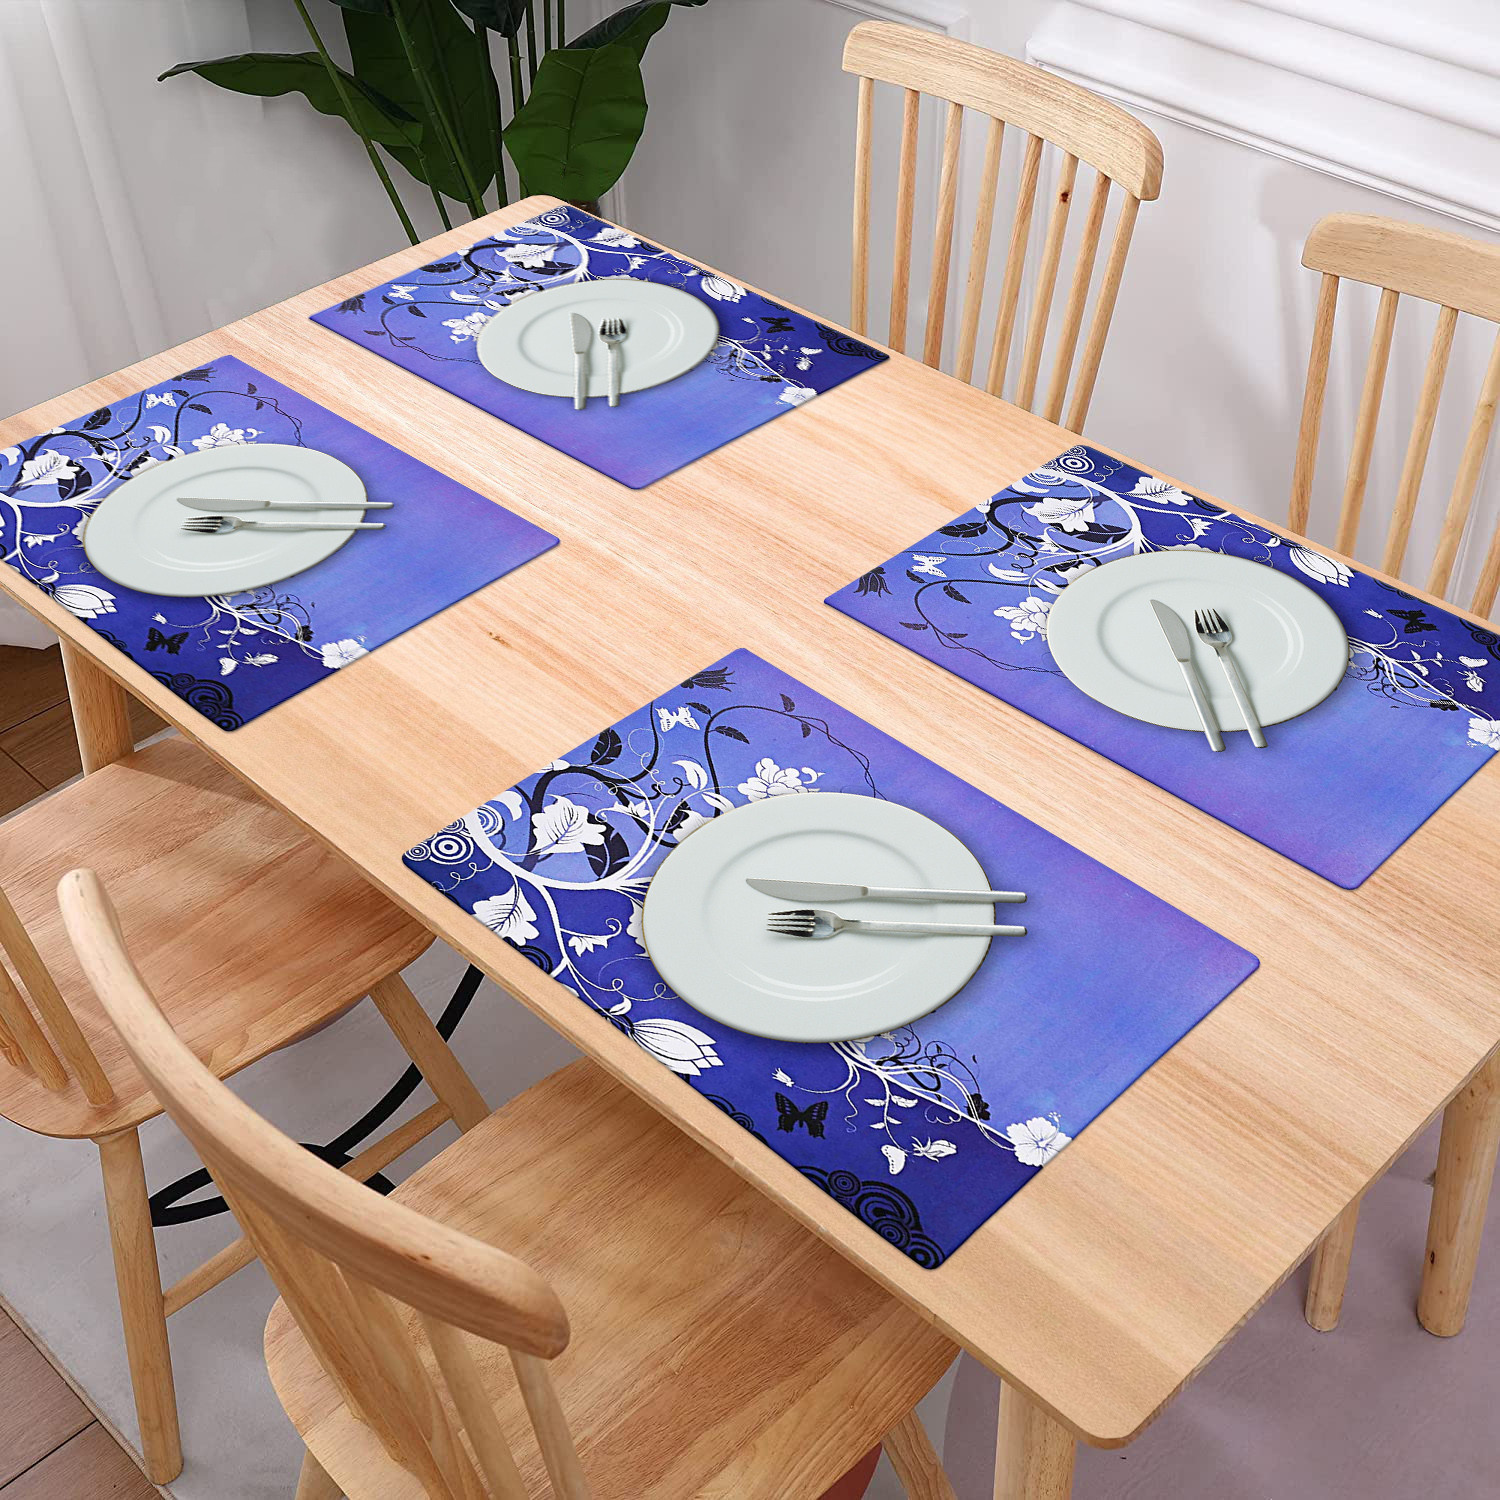 Kuber Industries Multiuses Floral Print PVC Table Placemat for kitchen, Dining Table Set of 6 (Blue)